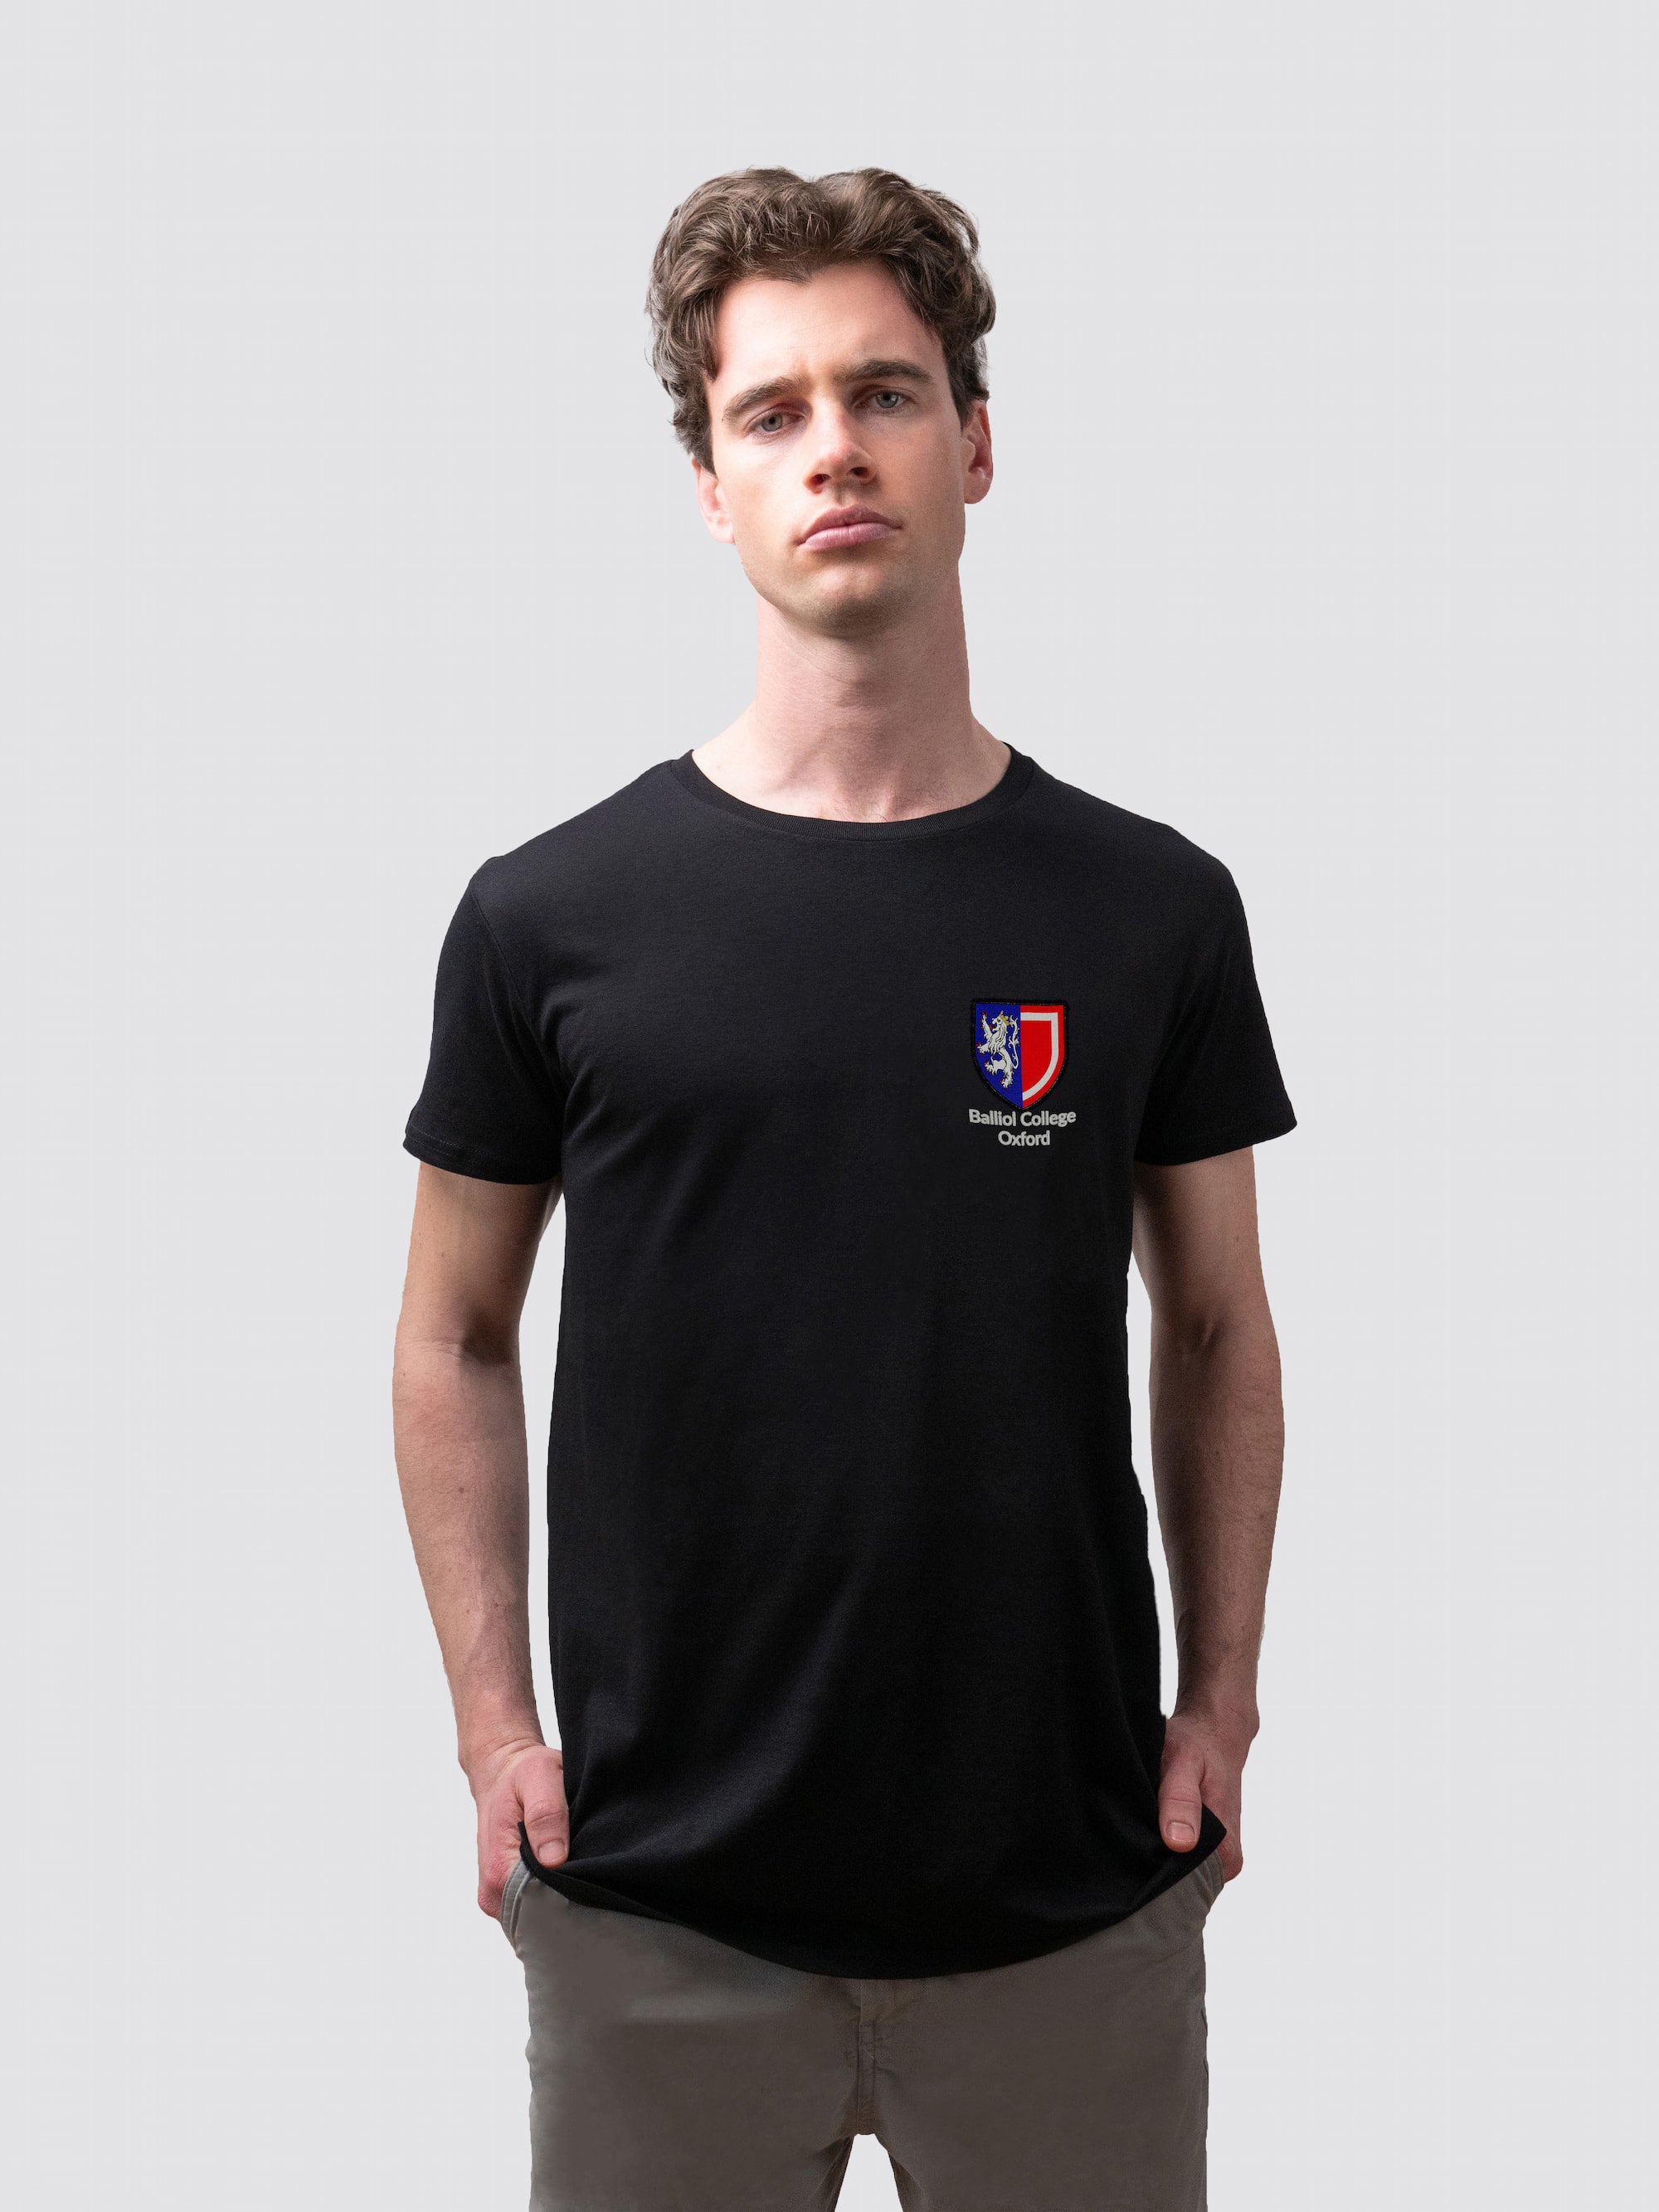 Sustainable Balliol t-shirt, made from organic cotton